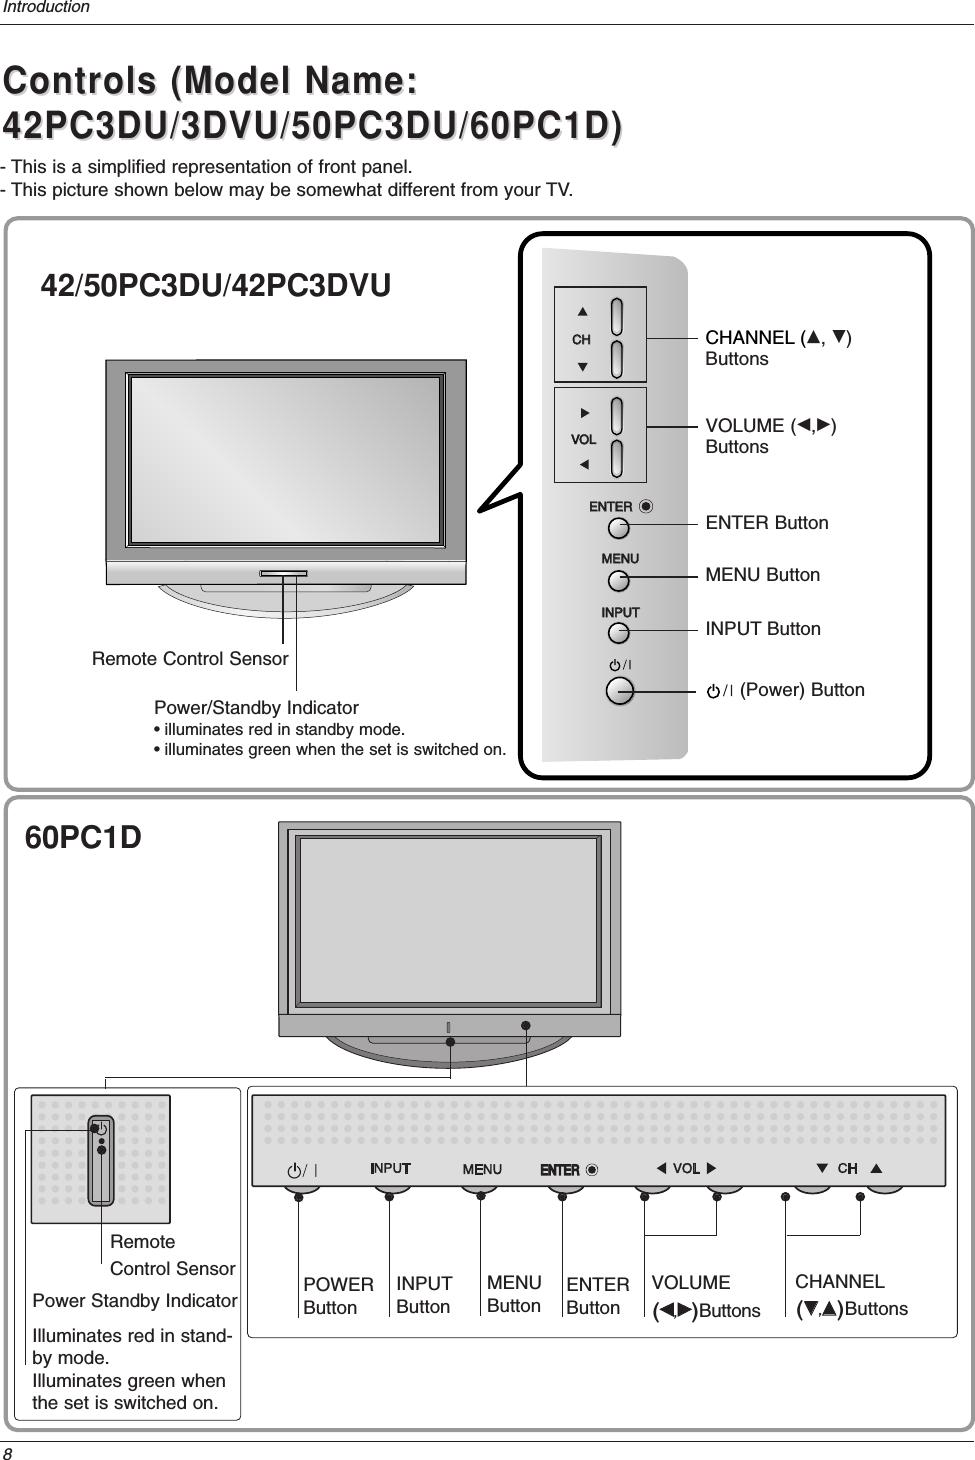 ENTER8IntroductionControls (Model Name:Controls (Model Name:42PC3DU/3DVU/50PC3DU/60PC1D)42PC3DU/3DVU/50PC3DU/60PC1D)- This is a simplified representation of front panel. - This picture shown below may be somewhat different from your TV.POWERButtonINPUTButtonENTERButtonVOLUME(FF,GG)ButtonsCHANNEL(EE,DD)ButtonsPower Standby IndicatorIlluminates red in stand-by mode.Illuminates green whenthe set is switched on.MENUButton      ENTERENTERRemote Control SensorCHCHVOLOLENTERENTERMENUMENUINPUTINPUTCHANNEL (D, E)ButtonsVOLUME (F,G)ButtonsENTER ButtonMENU ButtonINPUT ButtonRemote Control SensorPower/Standby Indicator• illuminates red in standby mode.• illuminates green when the set is switched on.(Power) Button42/50PC3DU/42PC3DVU60PC1D